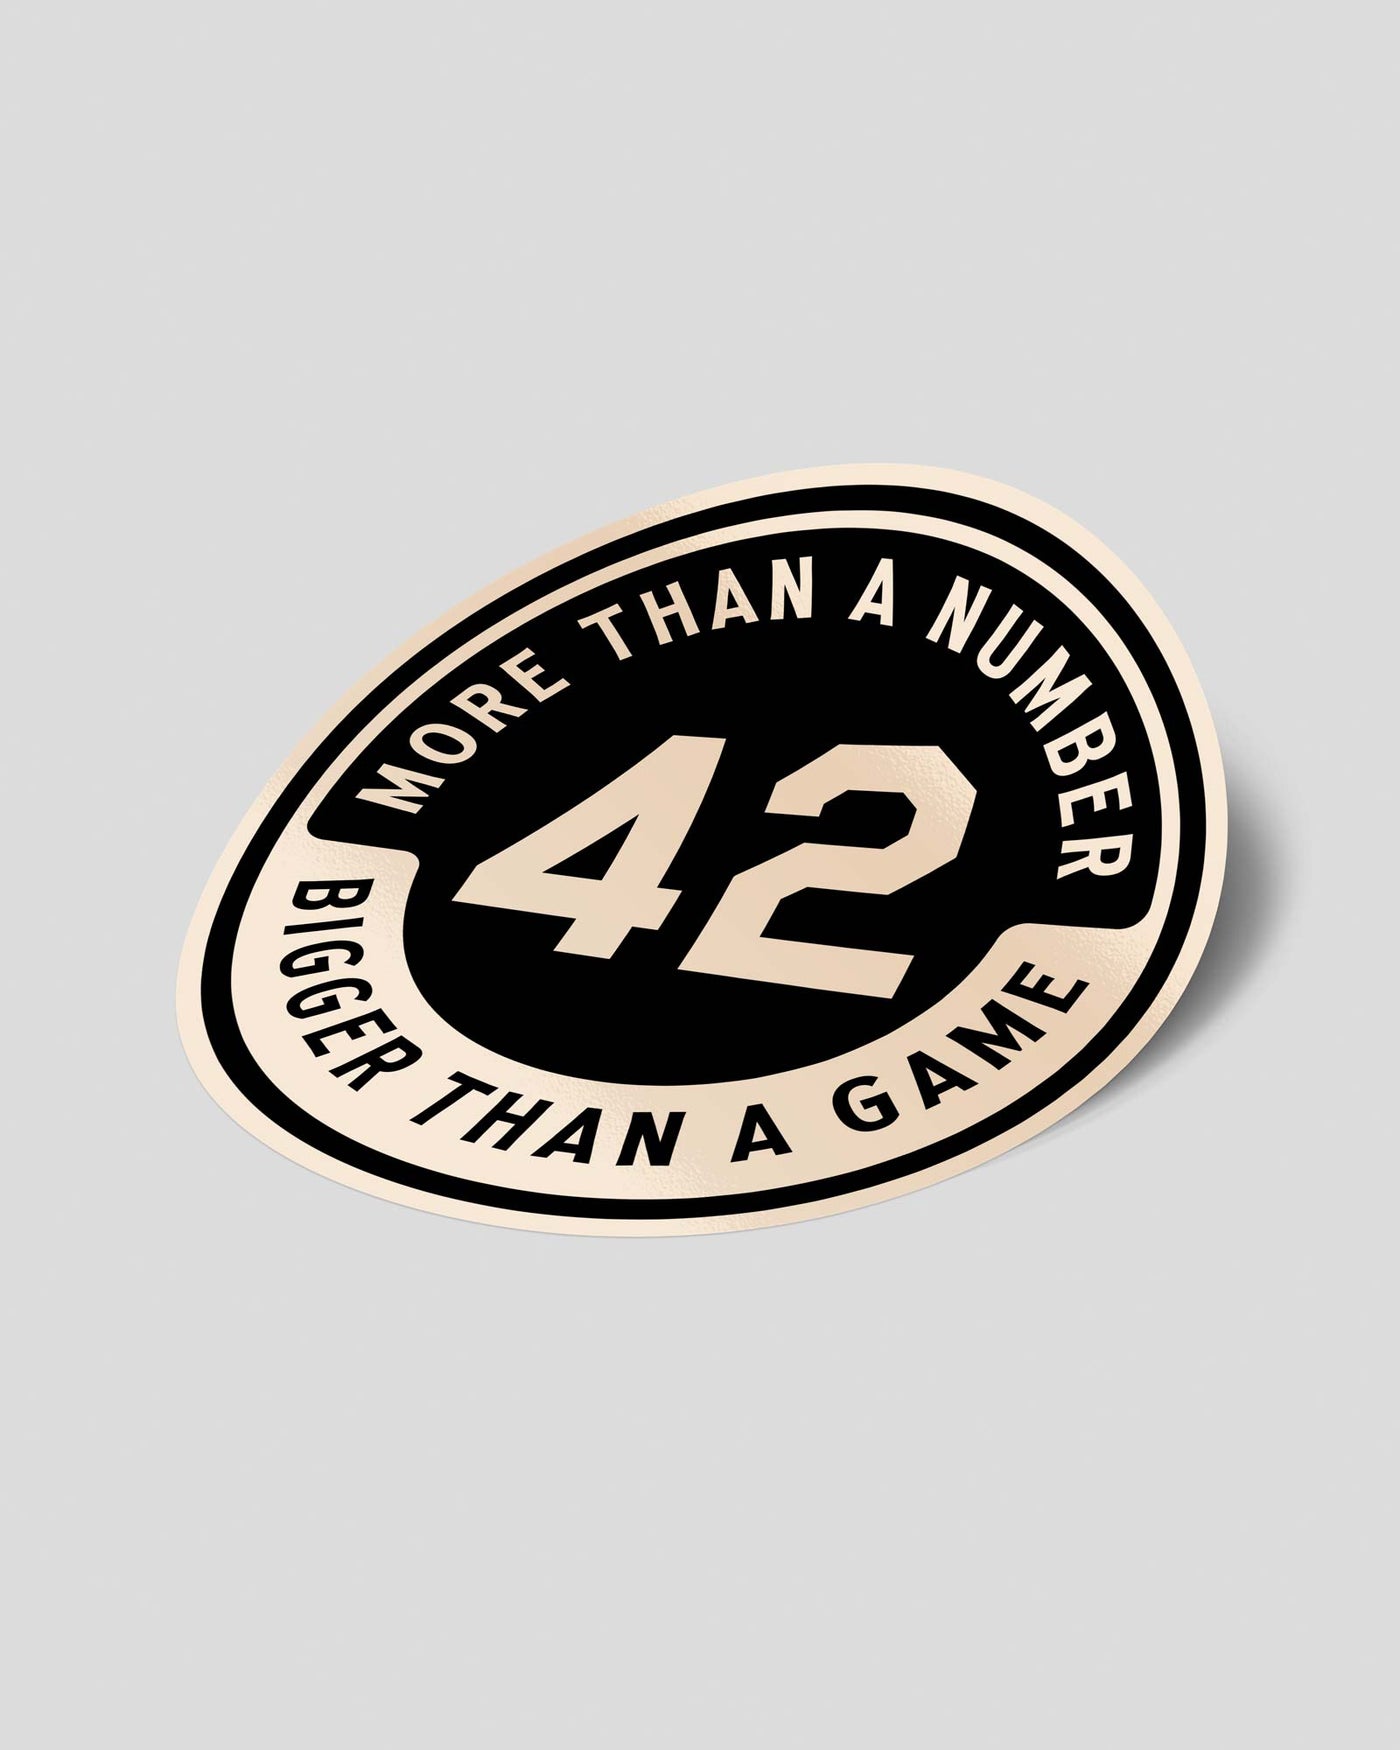 42: More Than a Number Helmet Decal